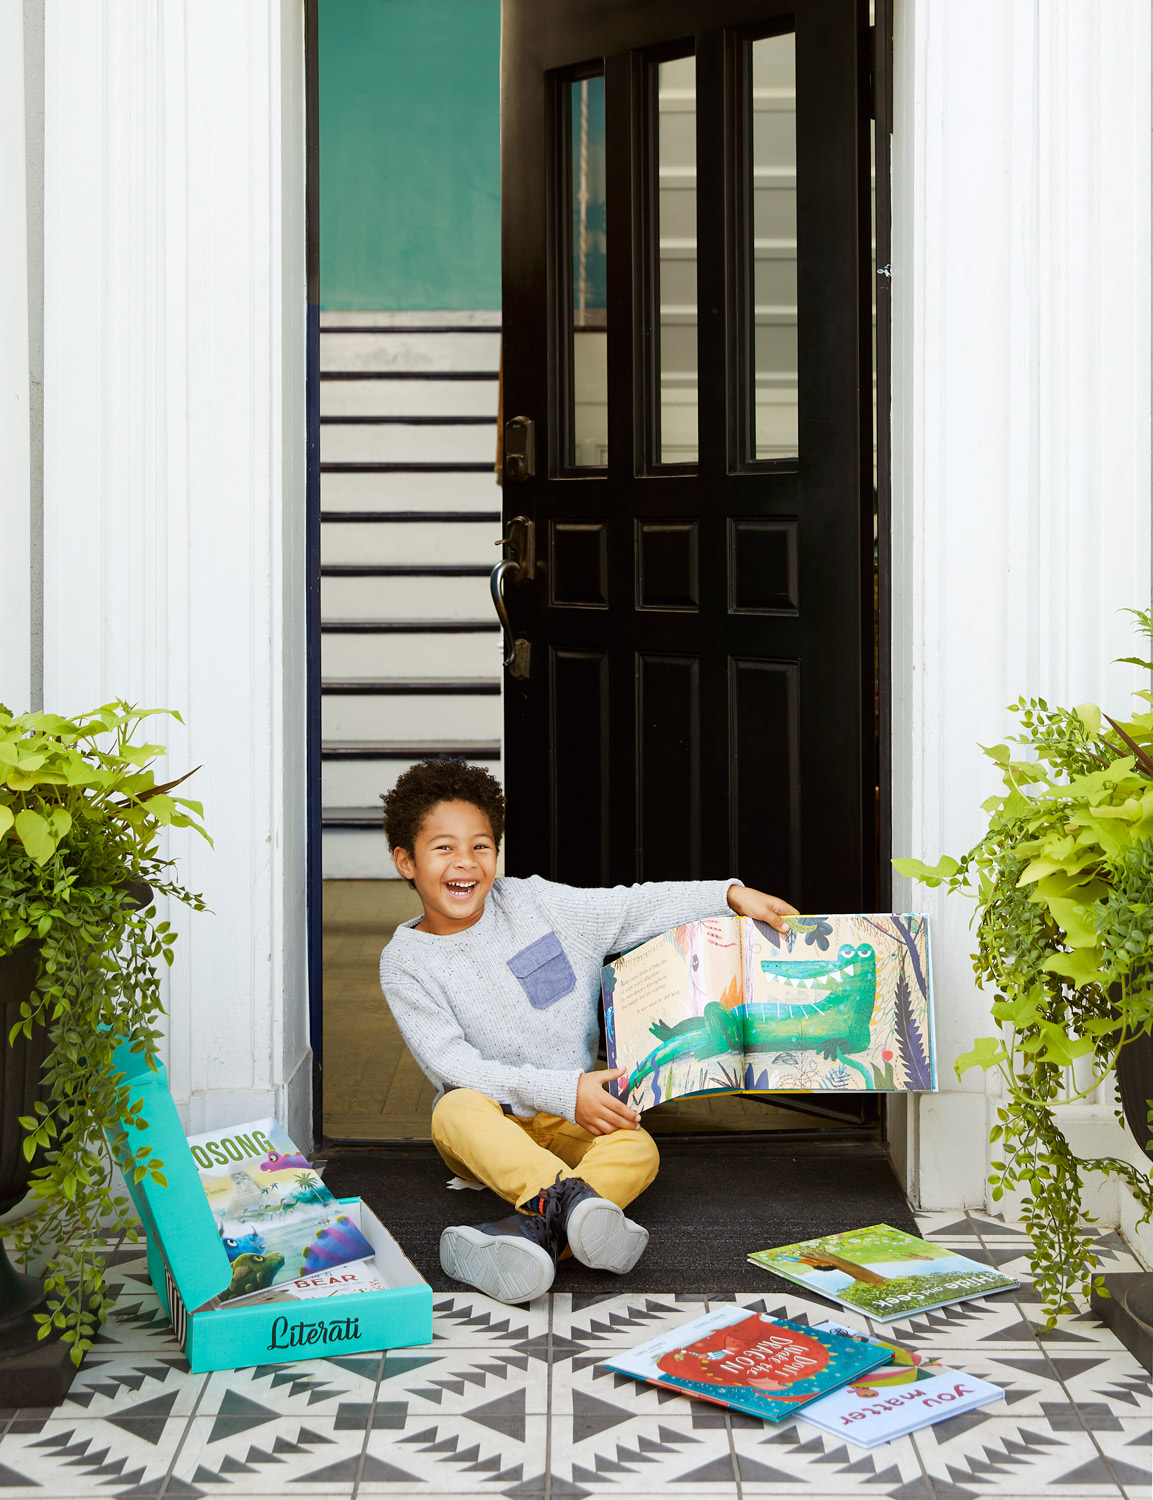 kids and books on the front porch by Austin, Texas based lifestyle photographer Buff Strickland